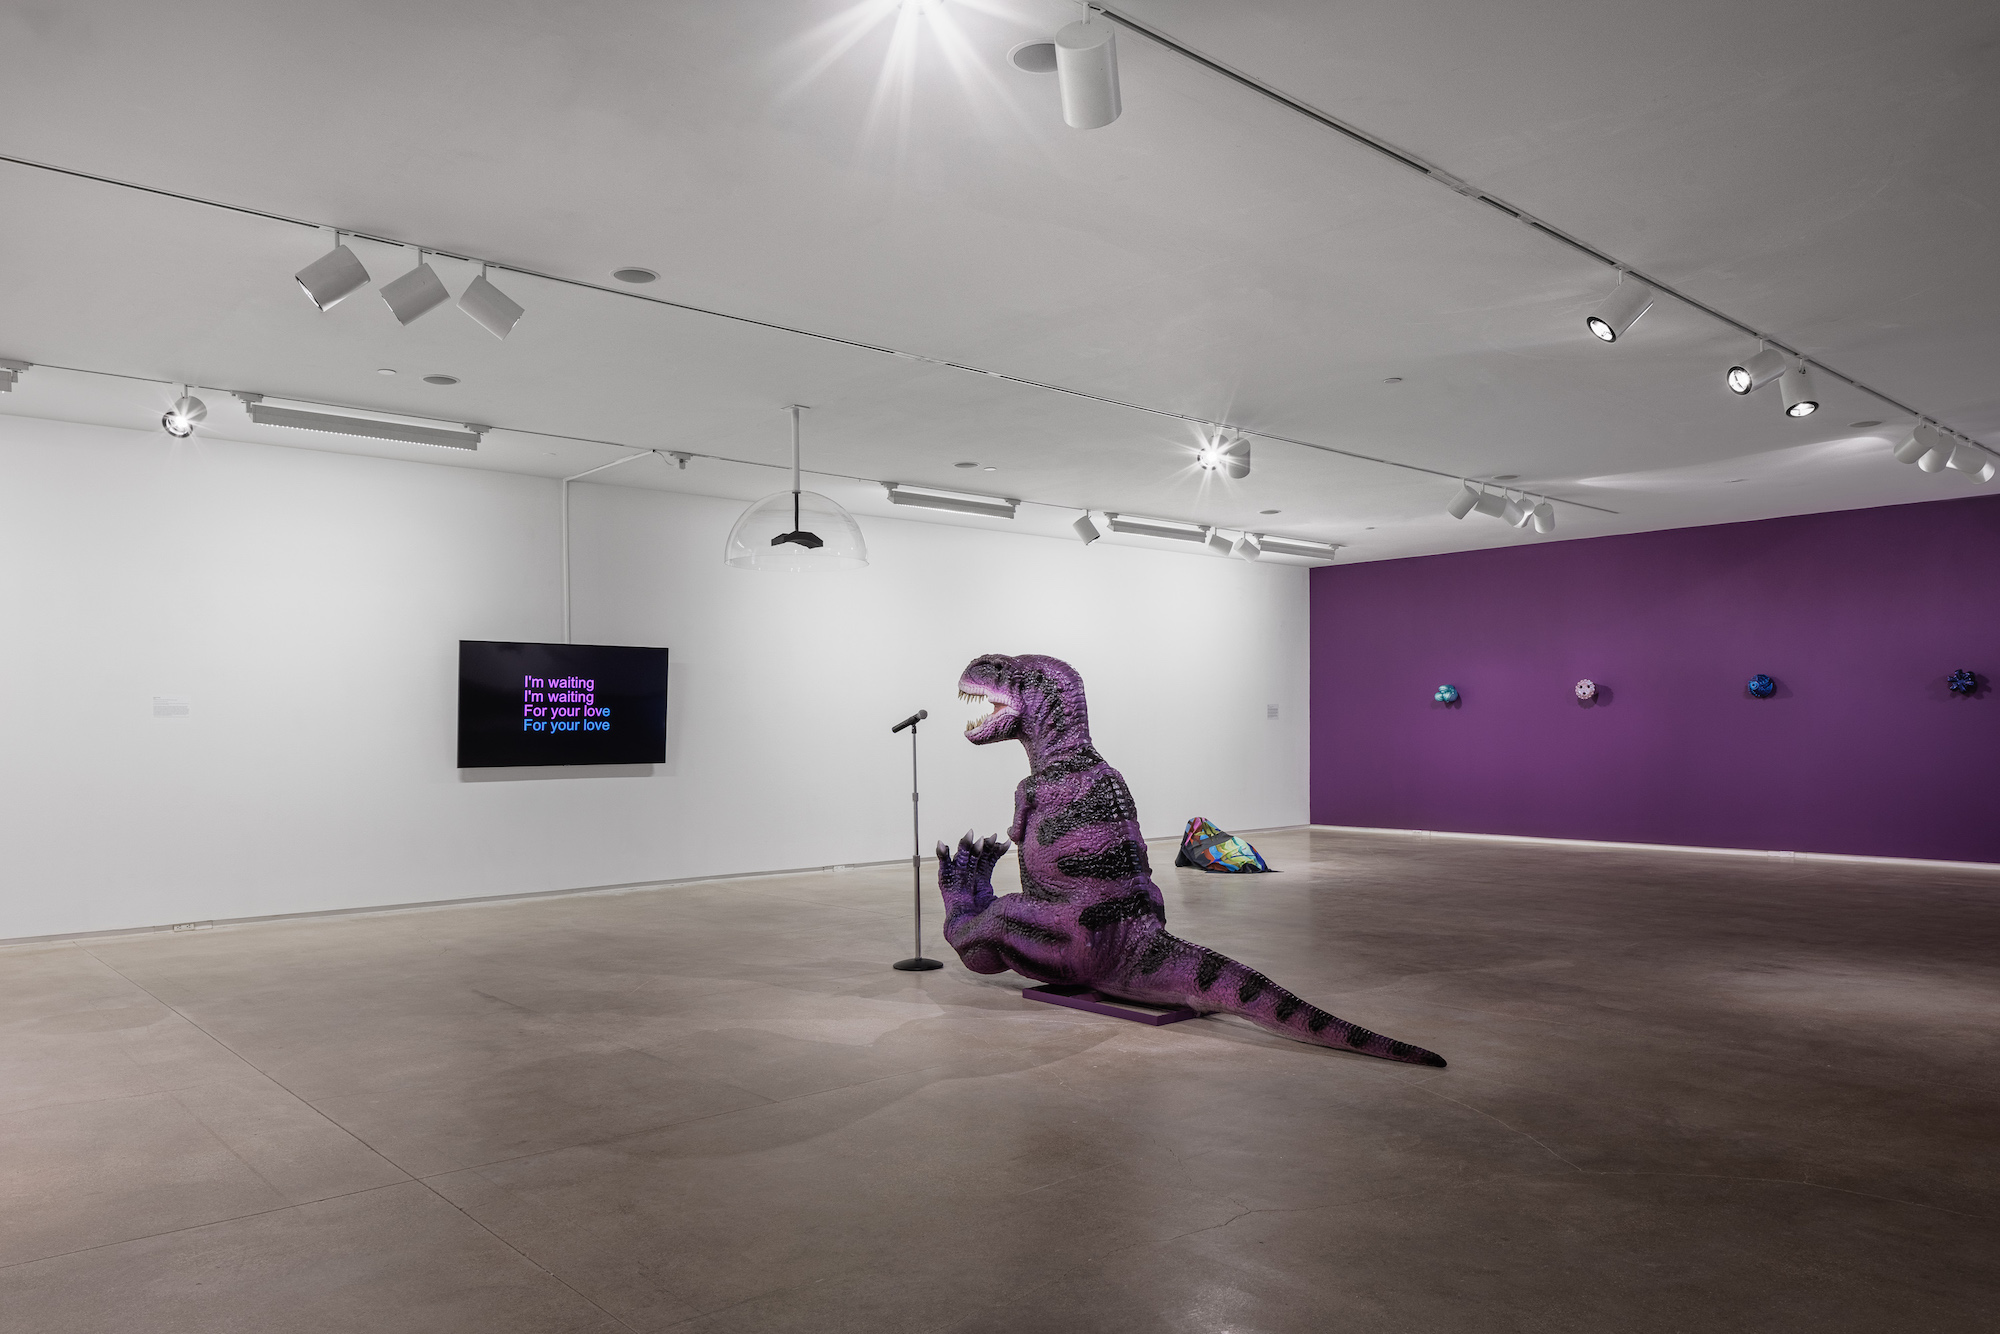 The far wall, a lush purple color of what is for the most part a white cube gallery but in the middle a T.Rex sits in the middle of the room in front of a microphone and tv, reading karaoke lyrics.